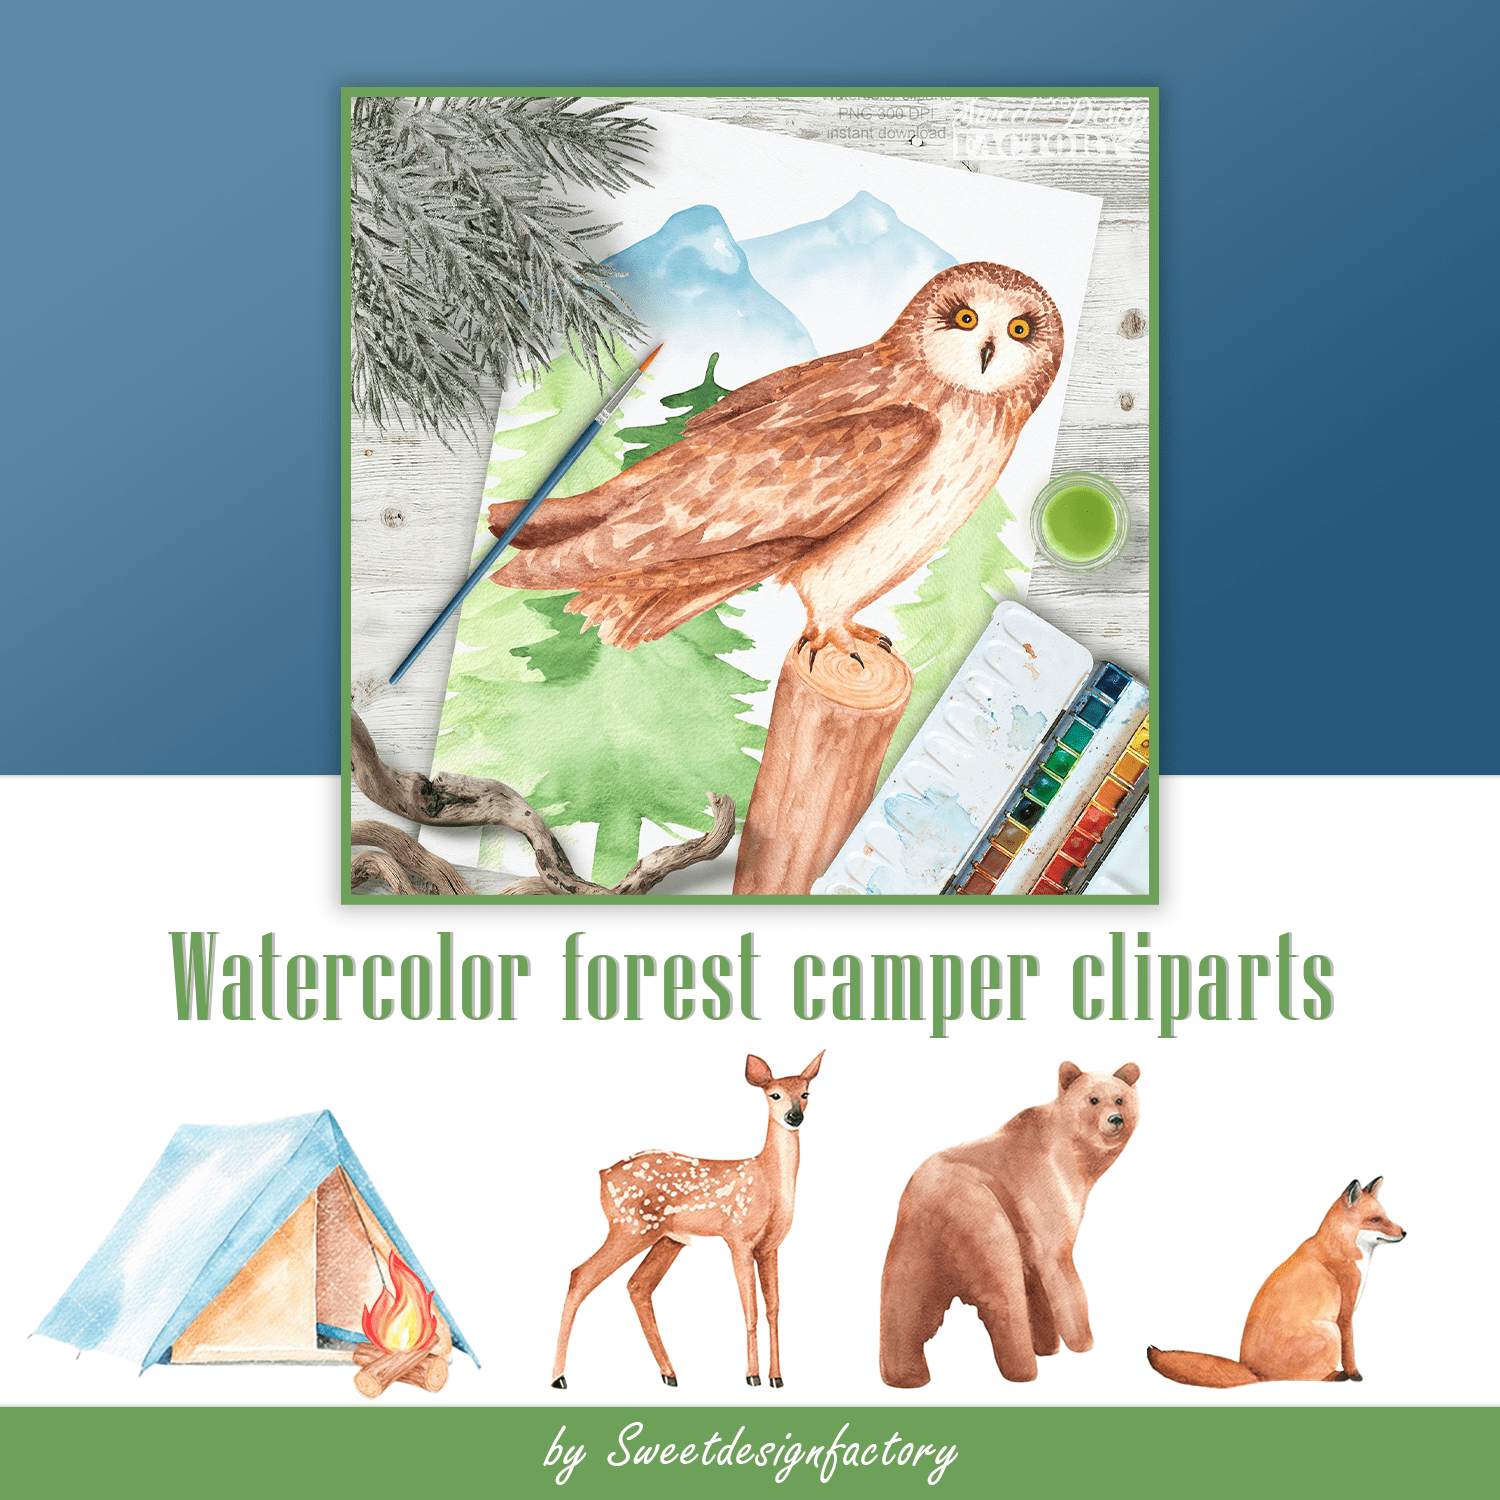 Watercolor forest camper cliparts cover.